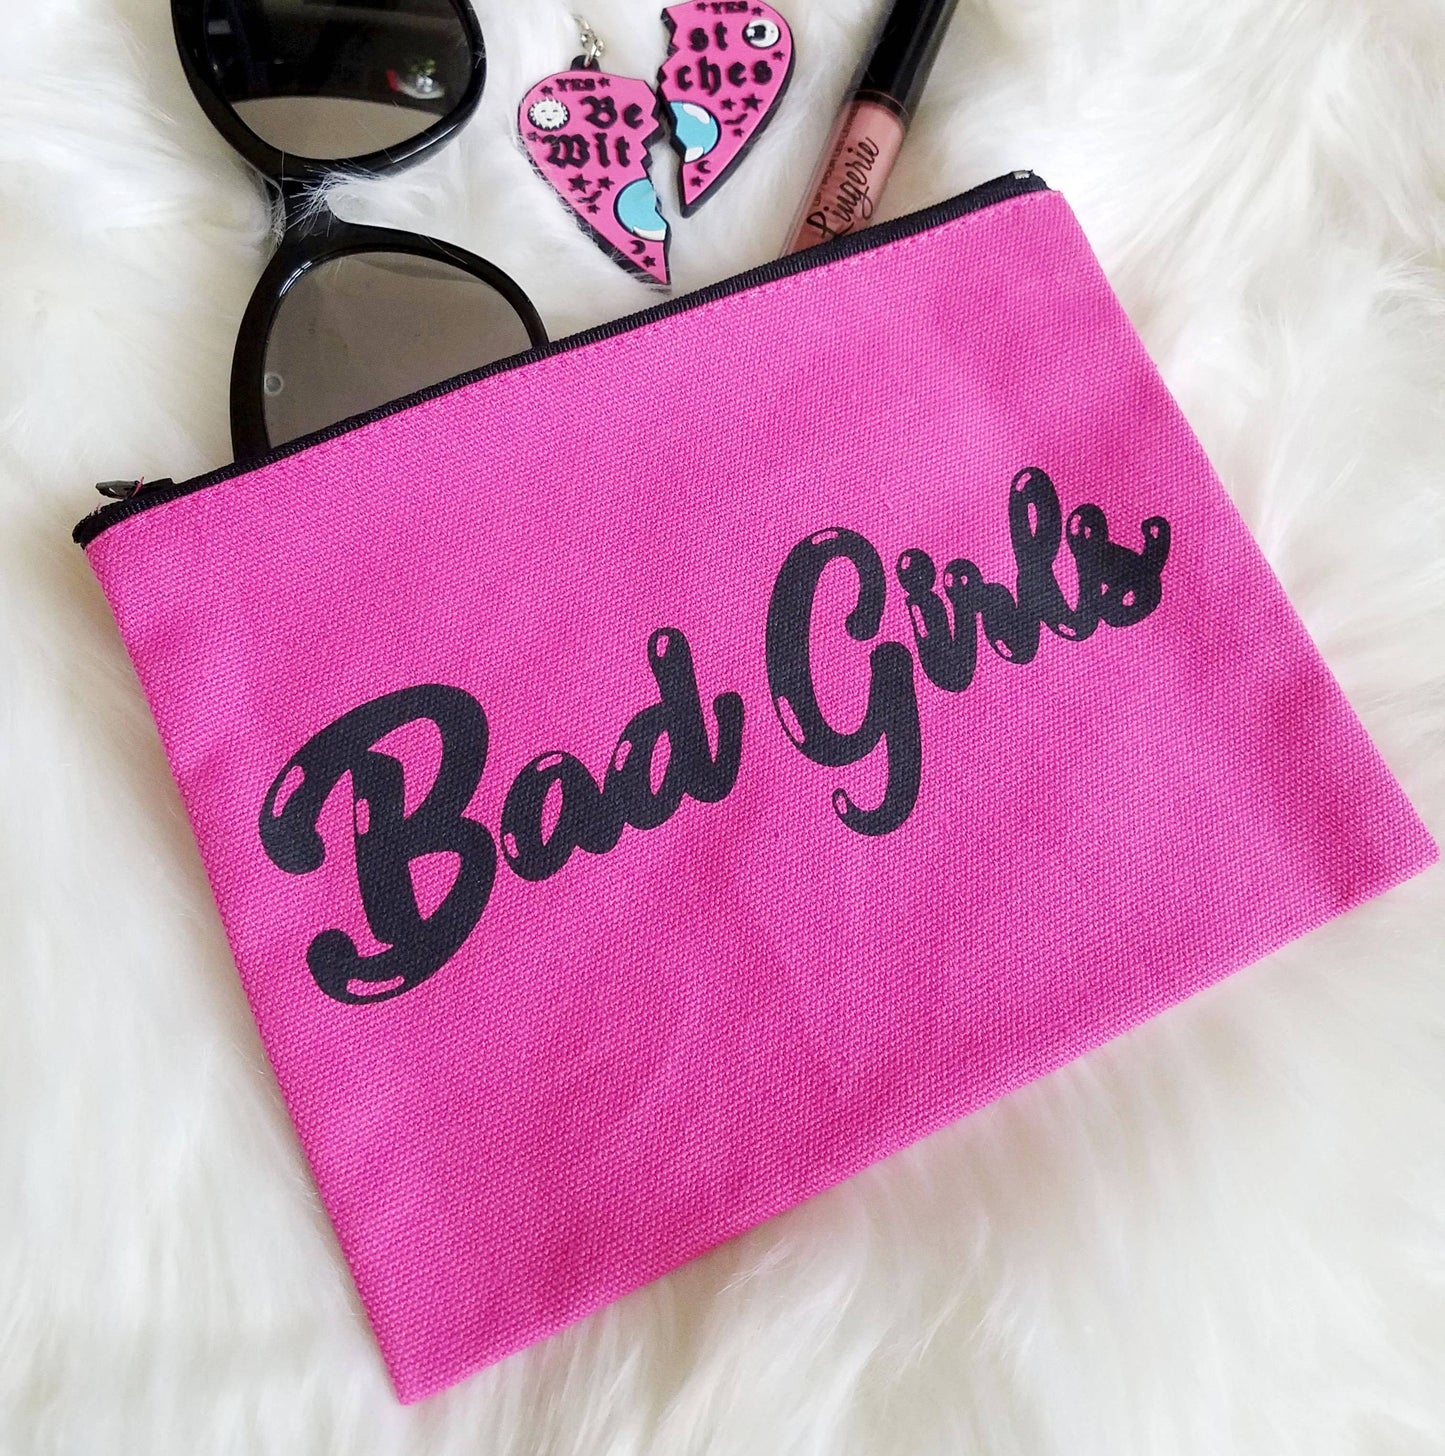 bad girls hot pink zipper pouch with black bubble letters shown displayed with sunglasses earrings and lipgloss